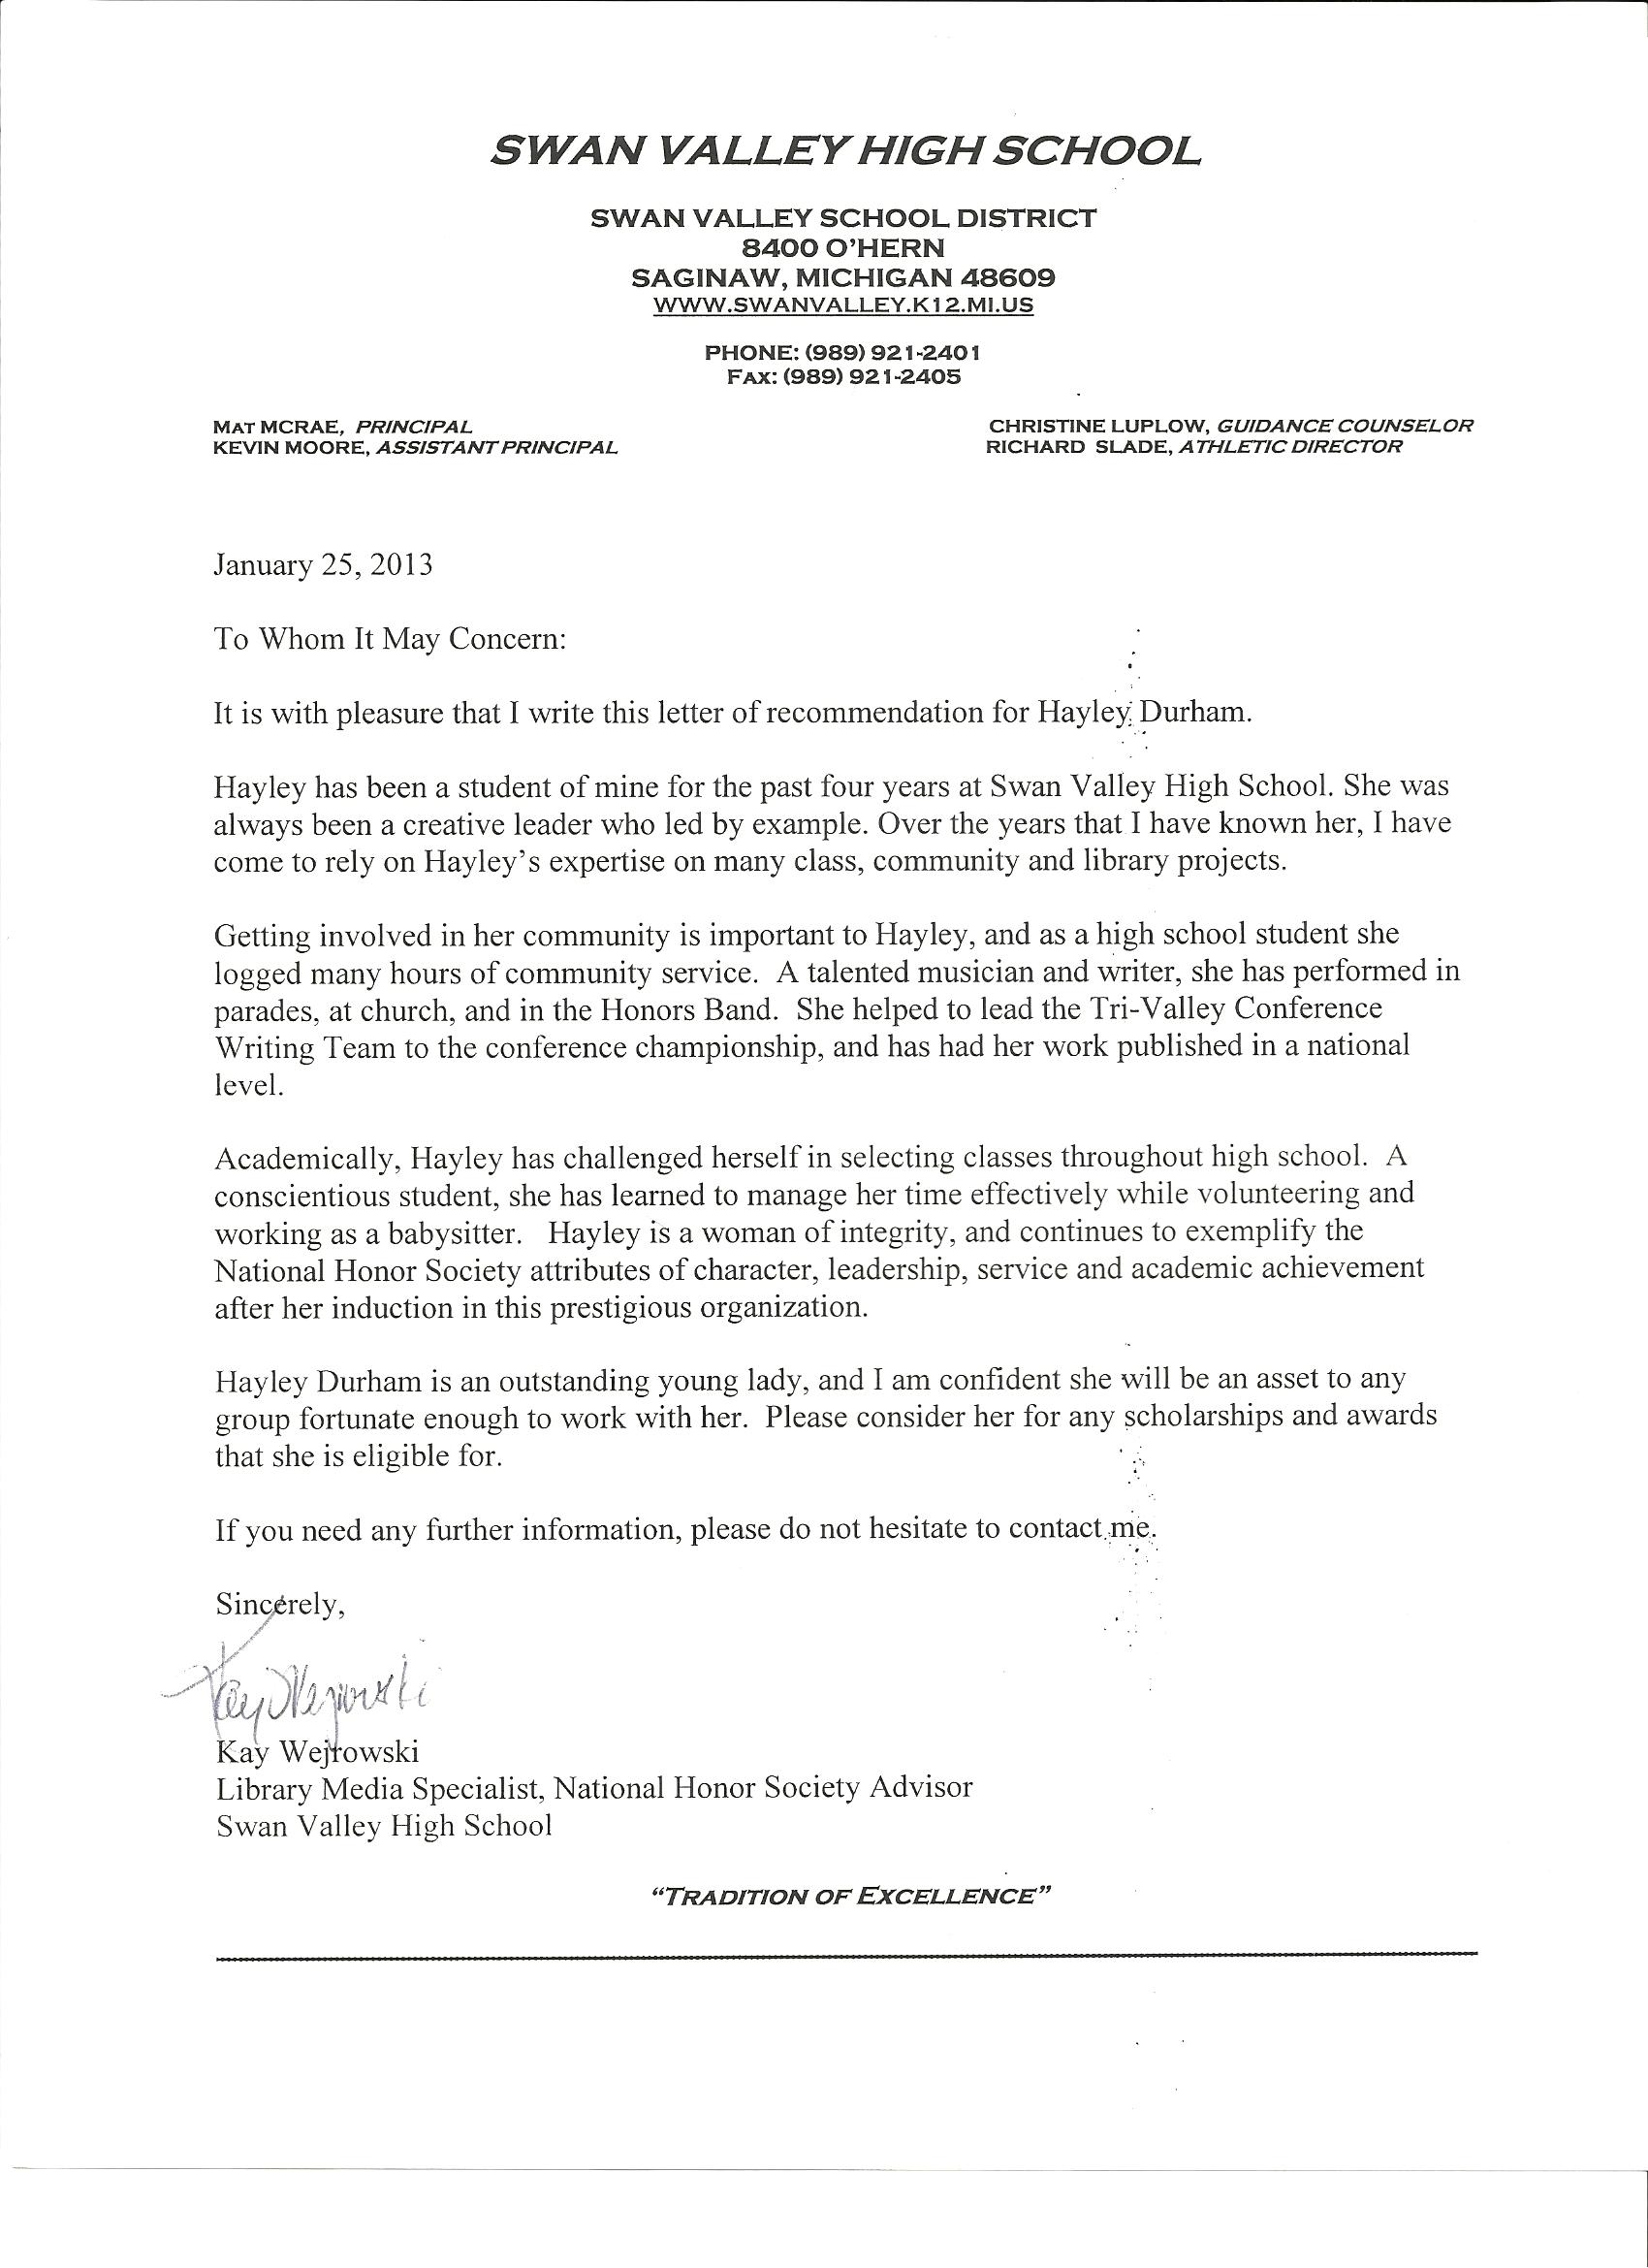 Nhs Letter Of Recommendation Template from hayleydurhamportfolio.weebly.com